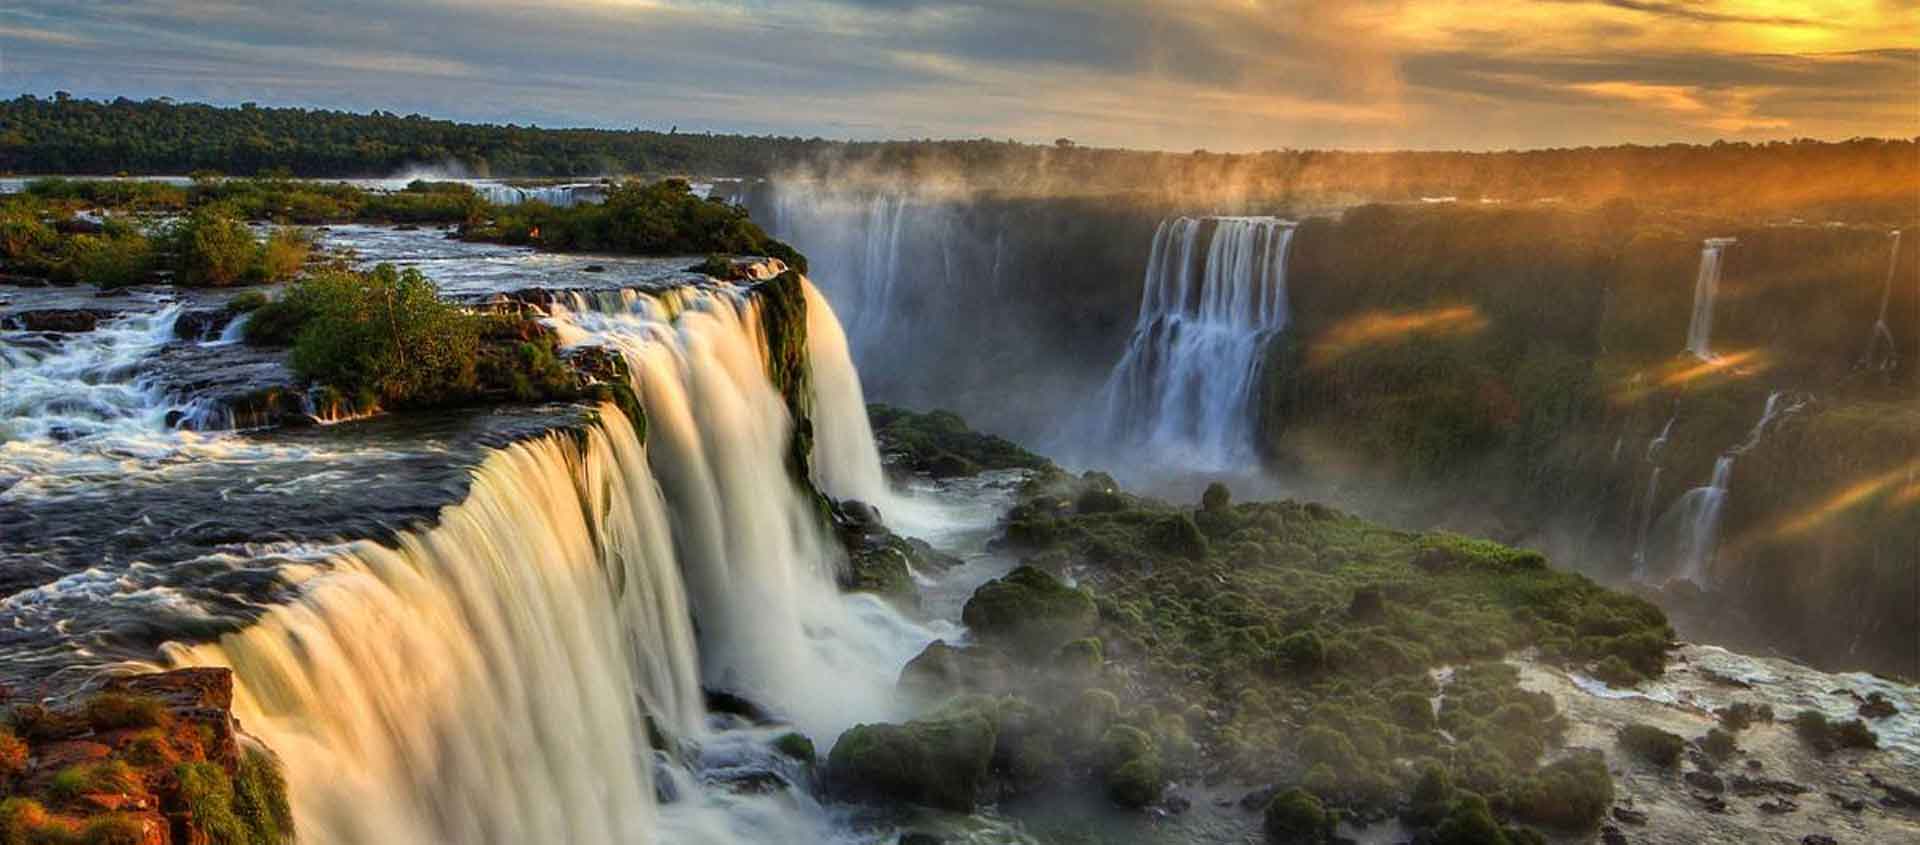 Northern Argentina and Chile Tour image of Iguazú Falls